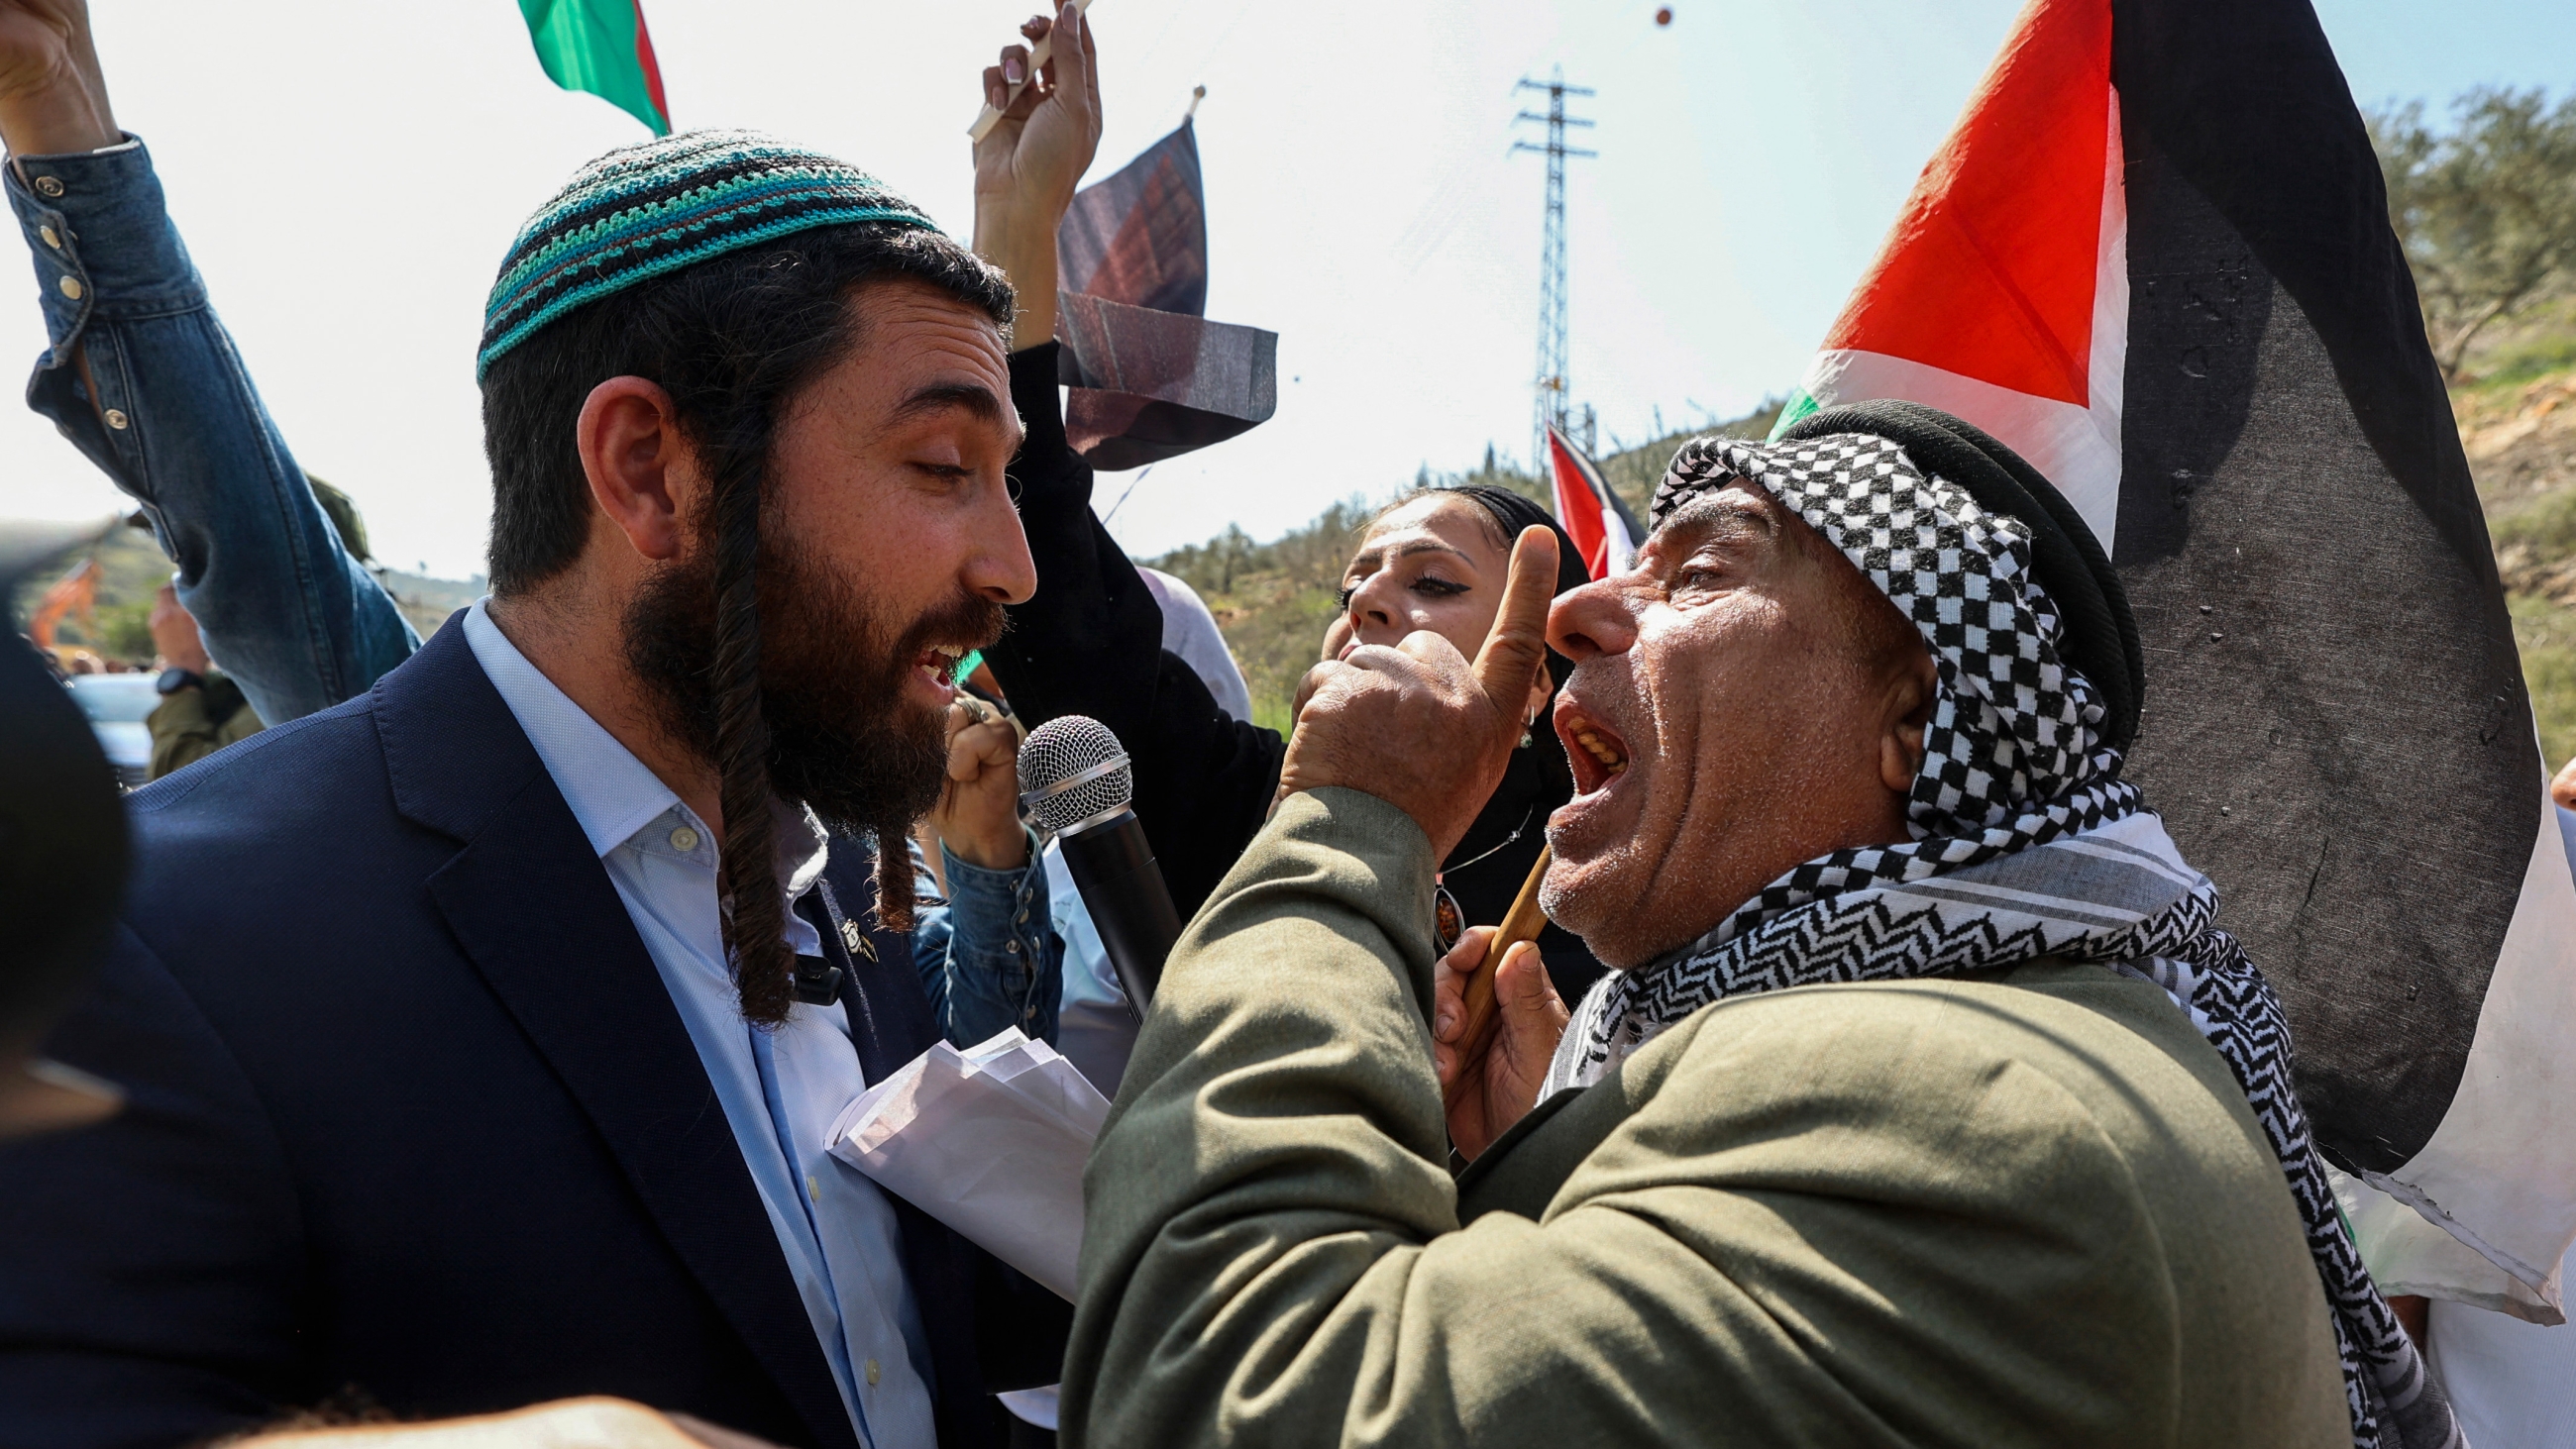 Israeli MP Tzvi Sukkot (L) is confronted as he tries to interrupt a rally by Palestinians against settler violence in the occupied West Bank town of Huwwara on 3 March 2023 (AFP)